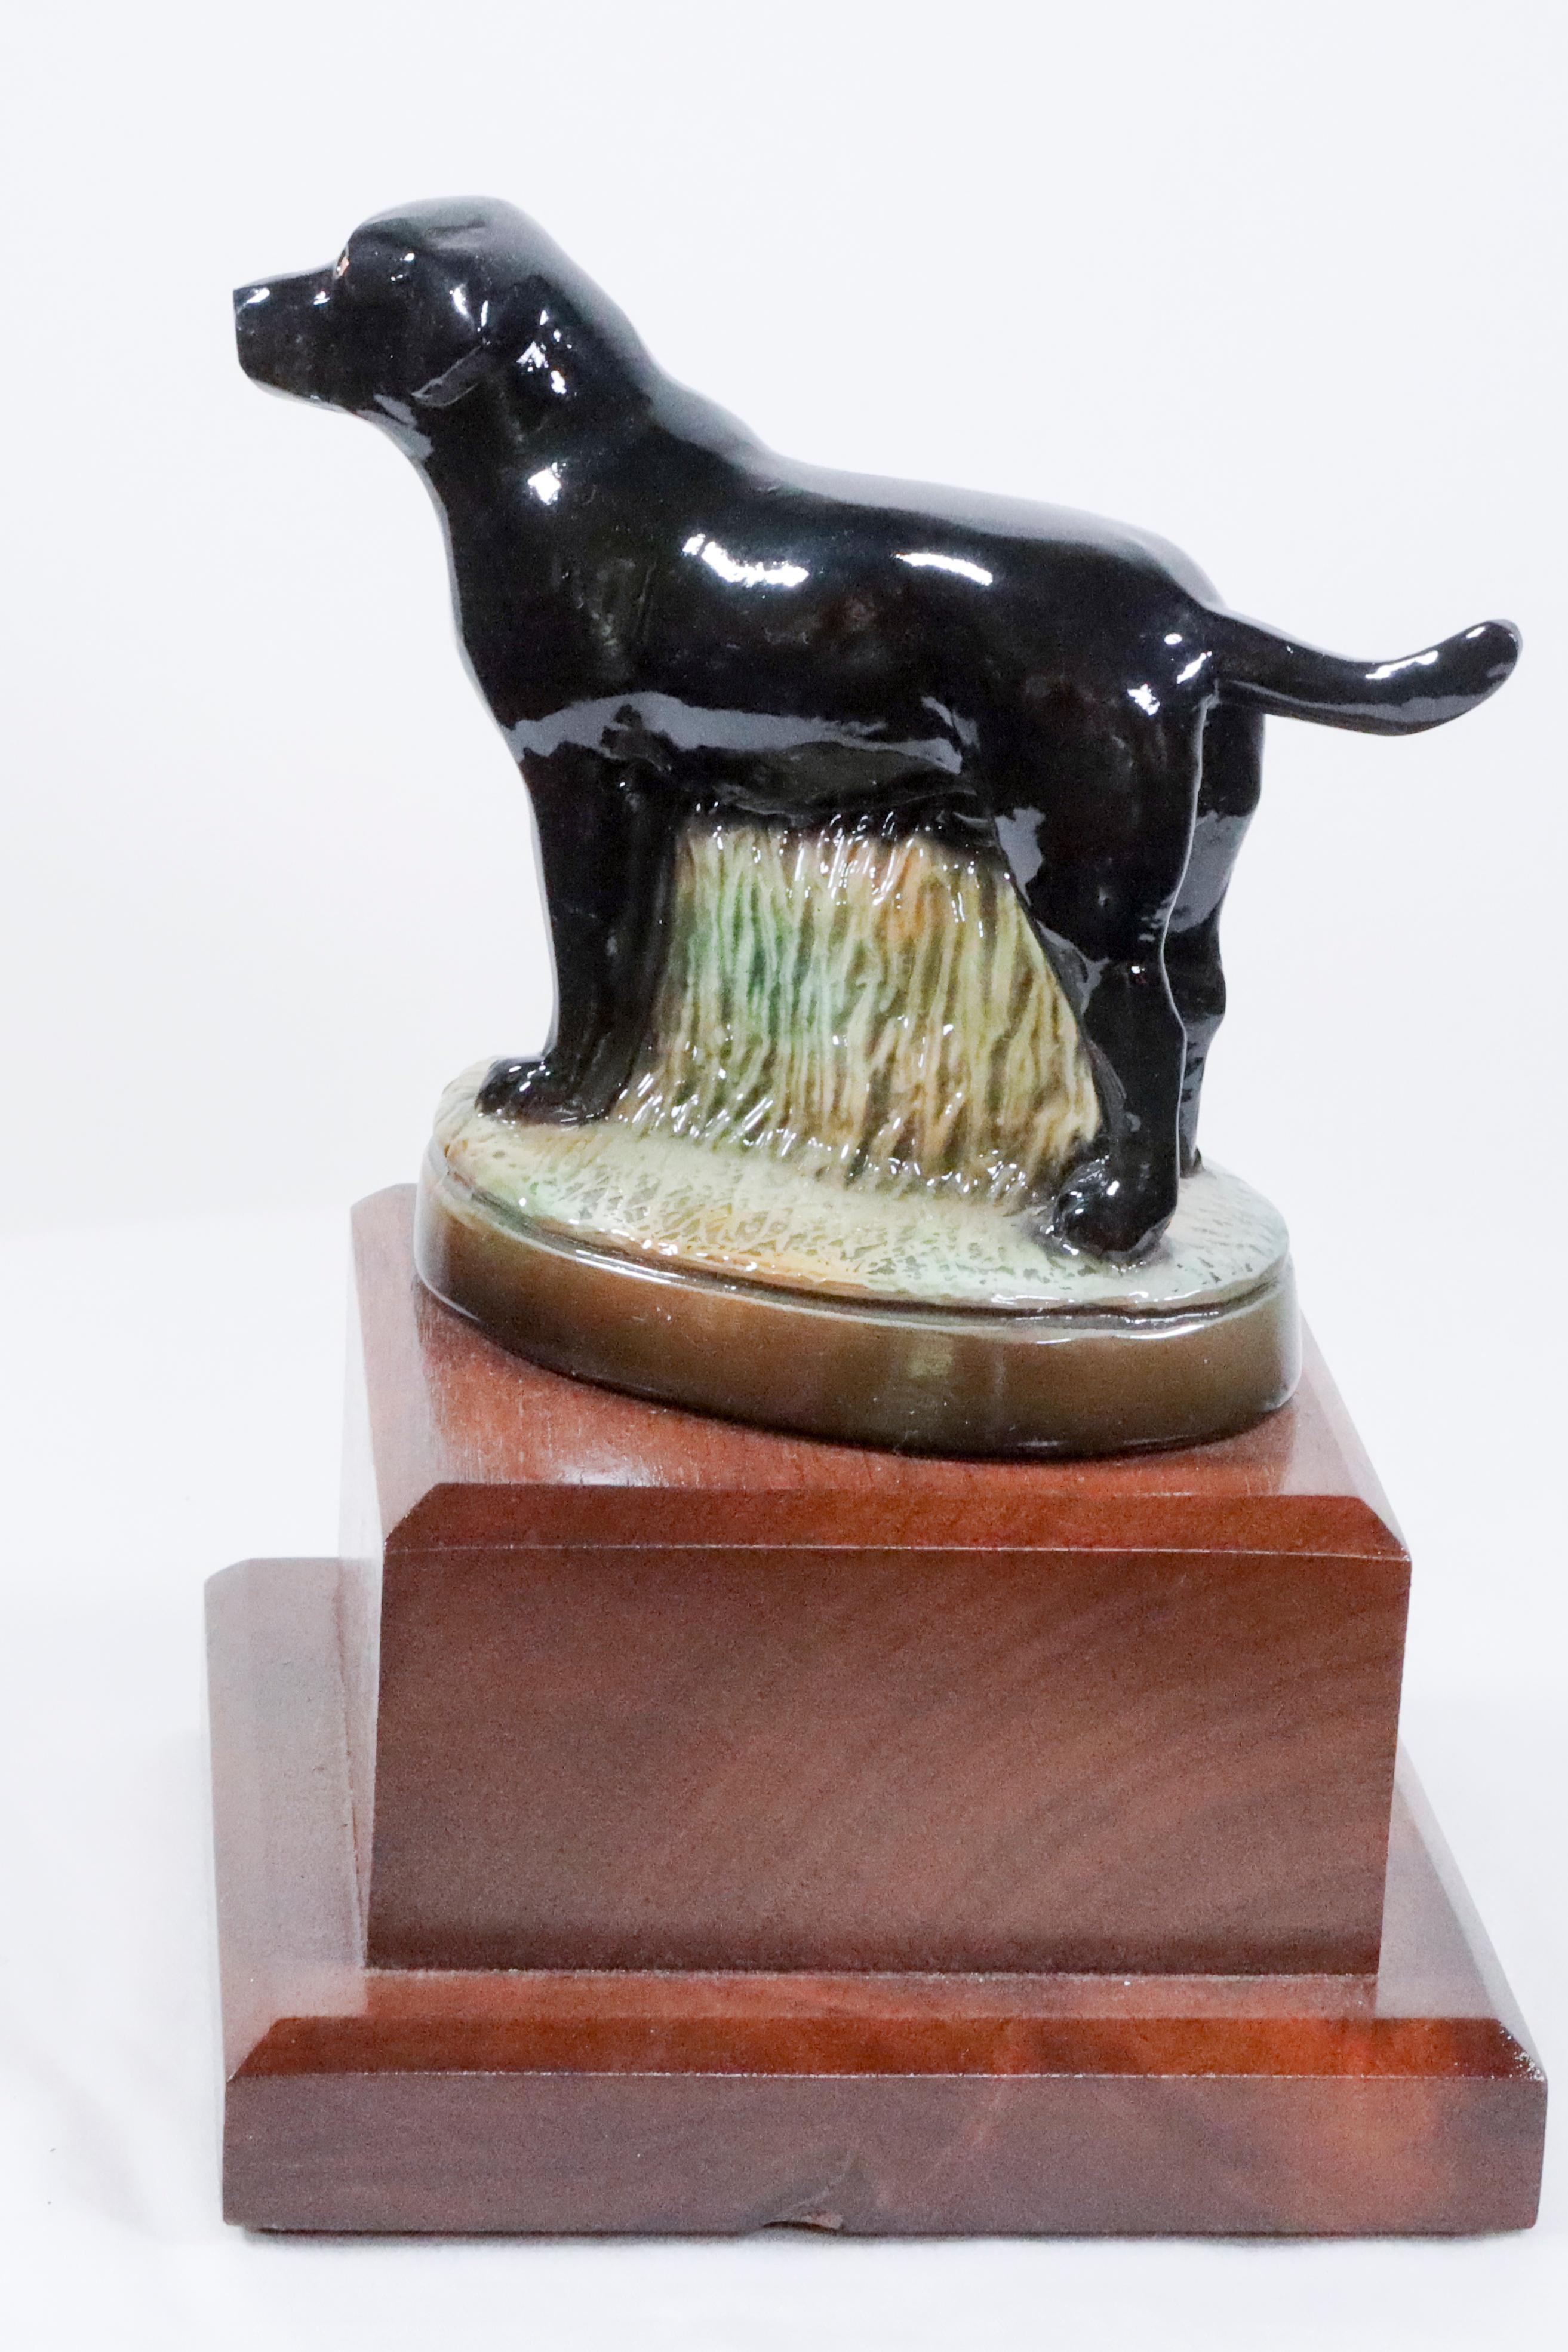 Black Labrador Retriever hand  cast and hand painted mounted on a wood base  - Art by Unknown